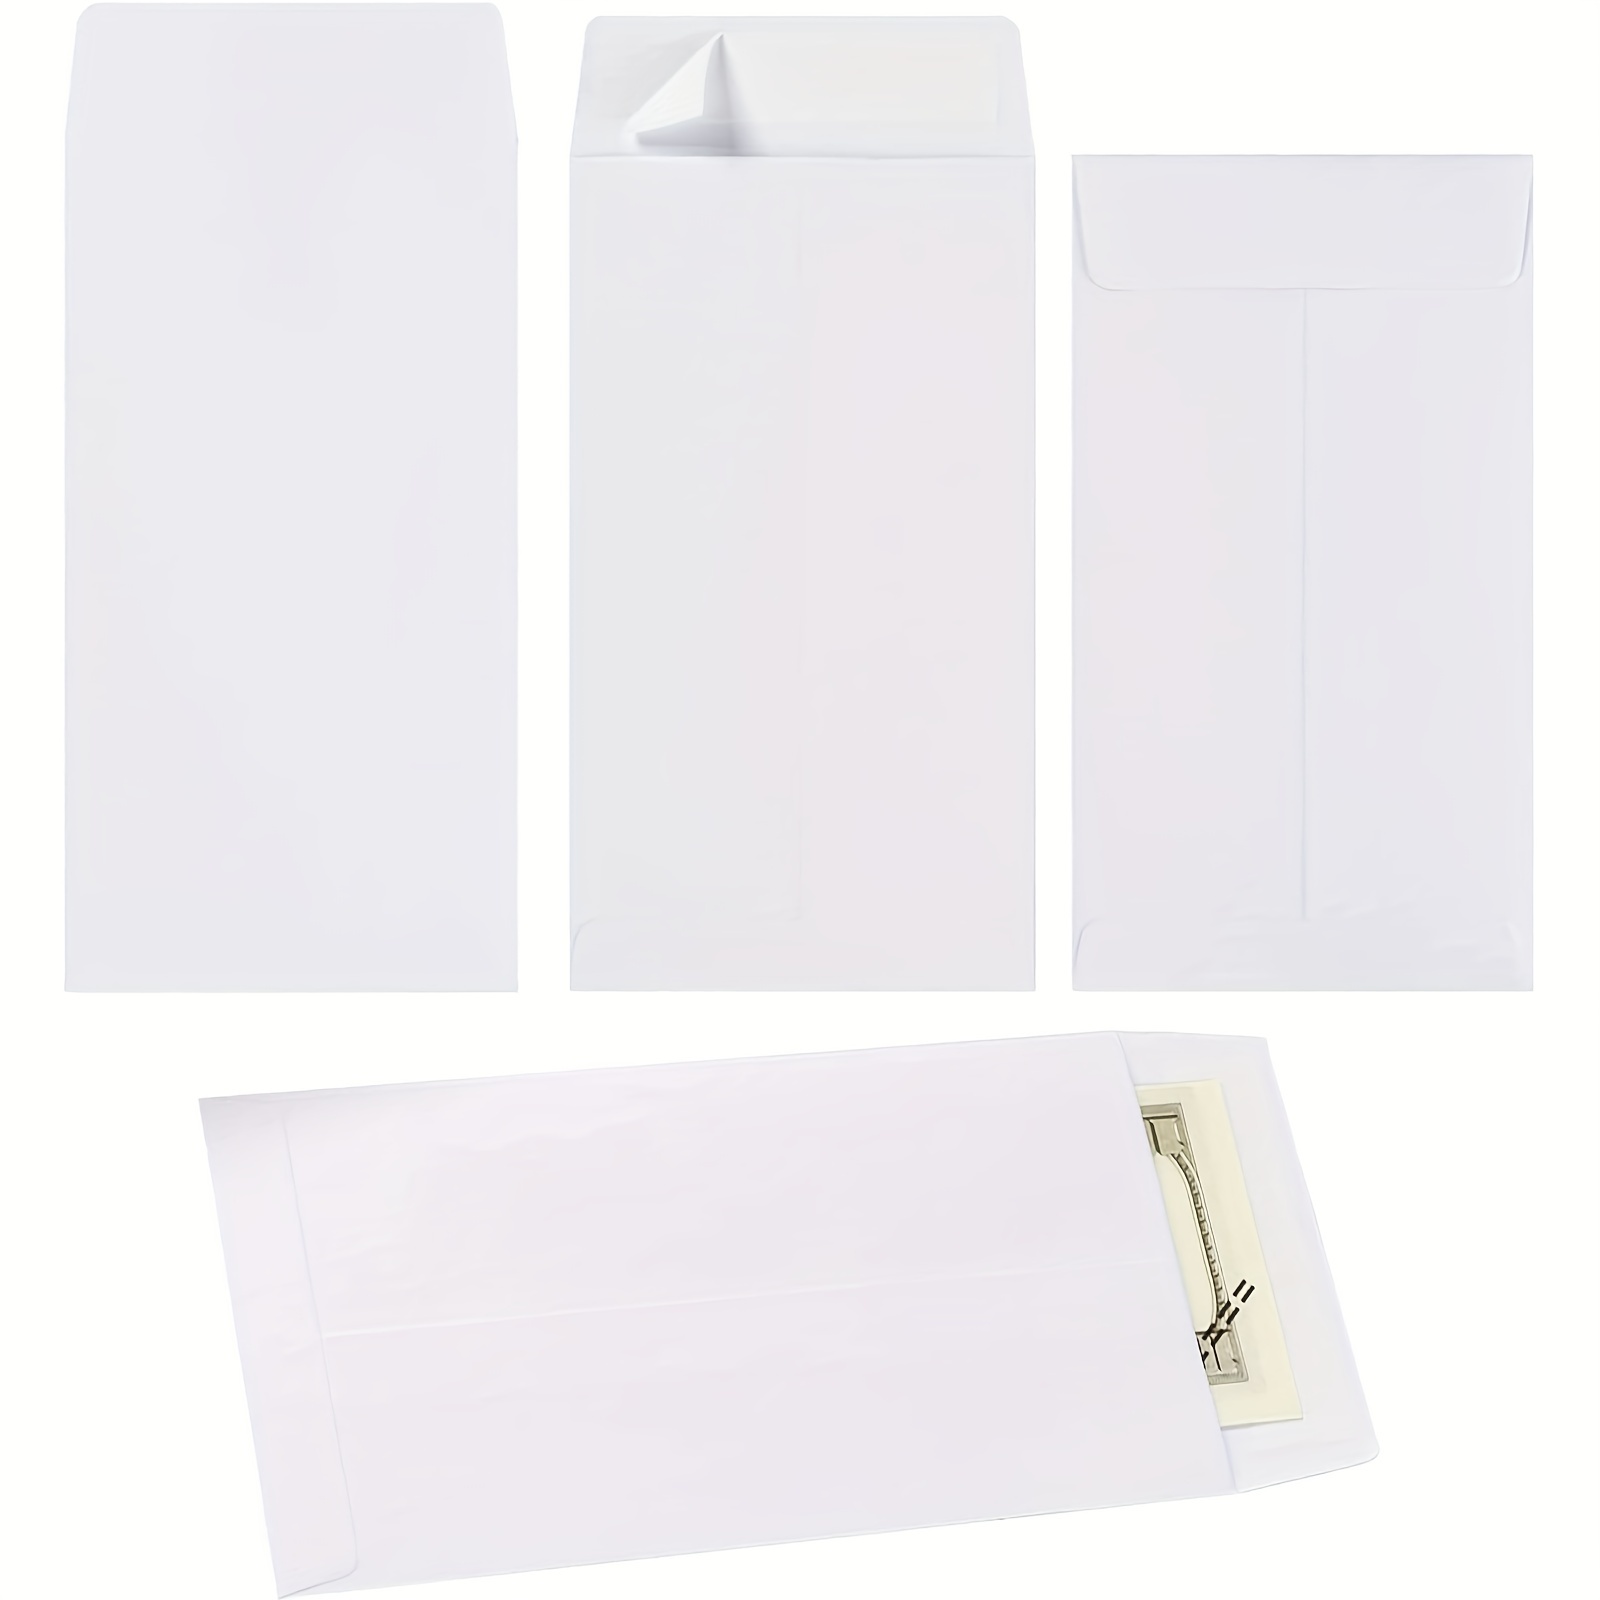 1 200 Piece Coin Envelopes 2.25 X 3.5 with Gummed Flap, Small